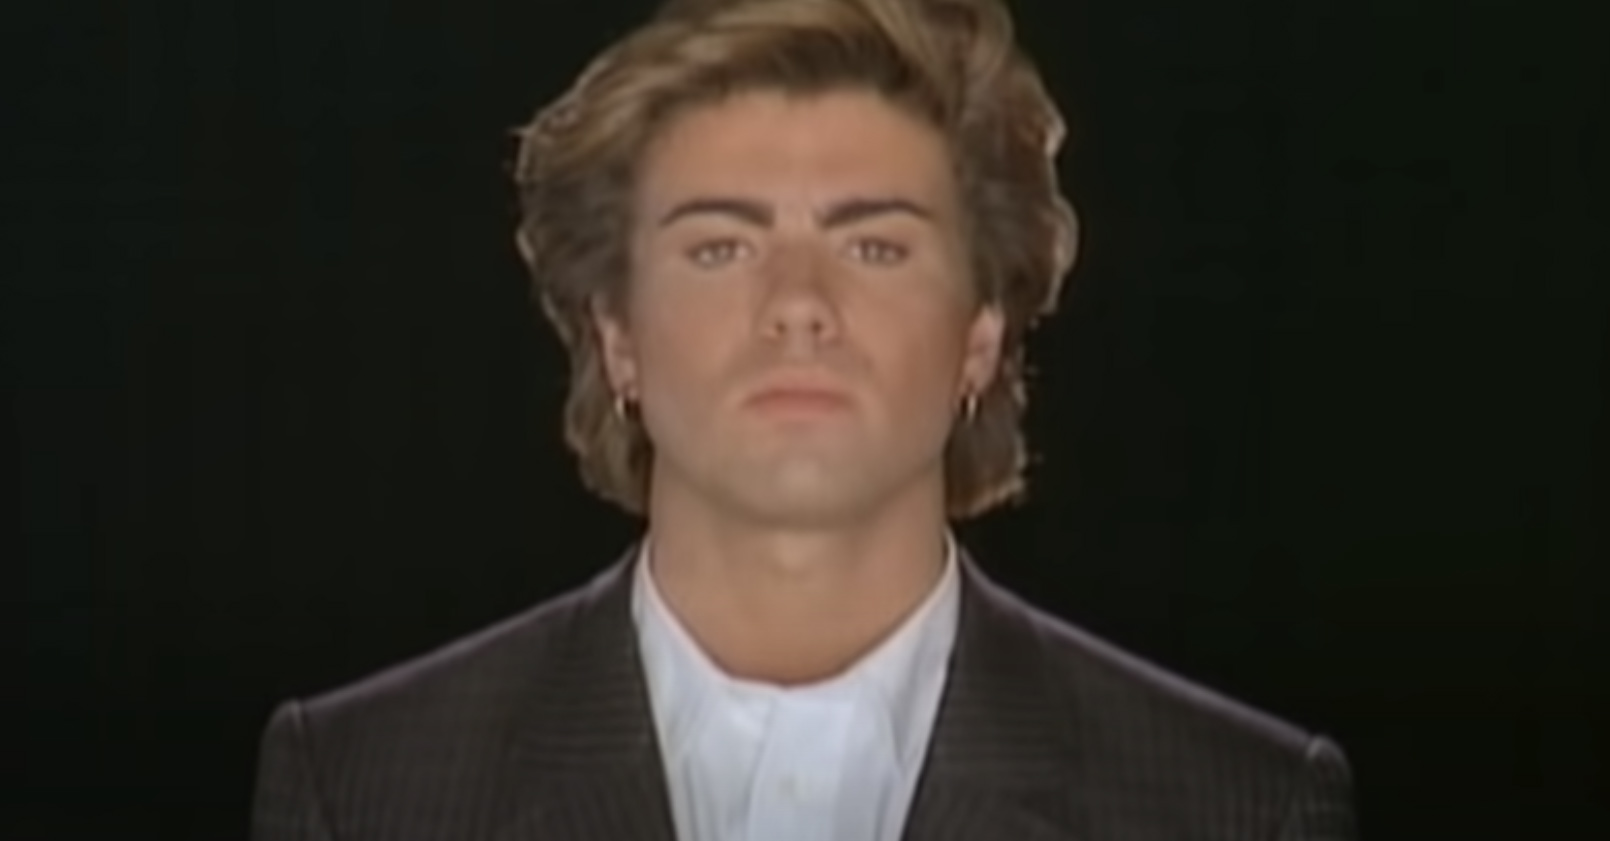 The Meaning Behind George Michael's 'Careless Whisper' | Rare